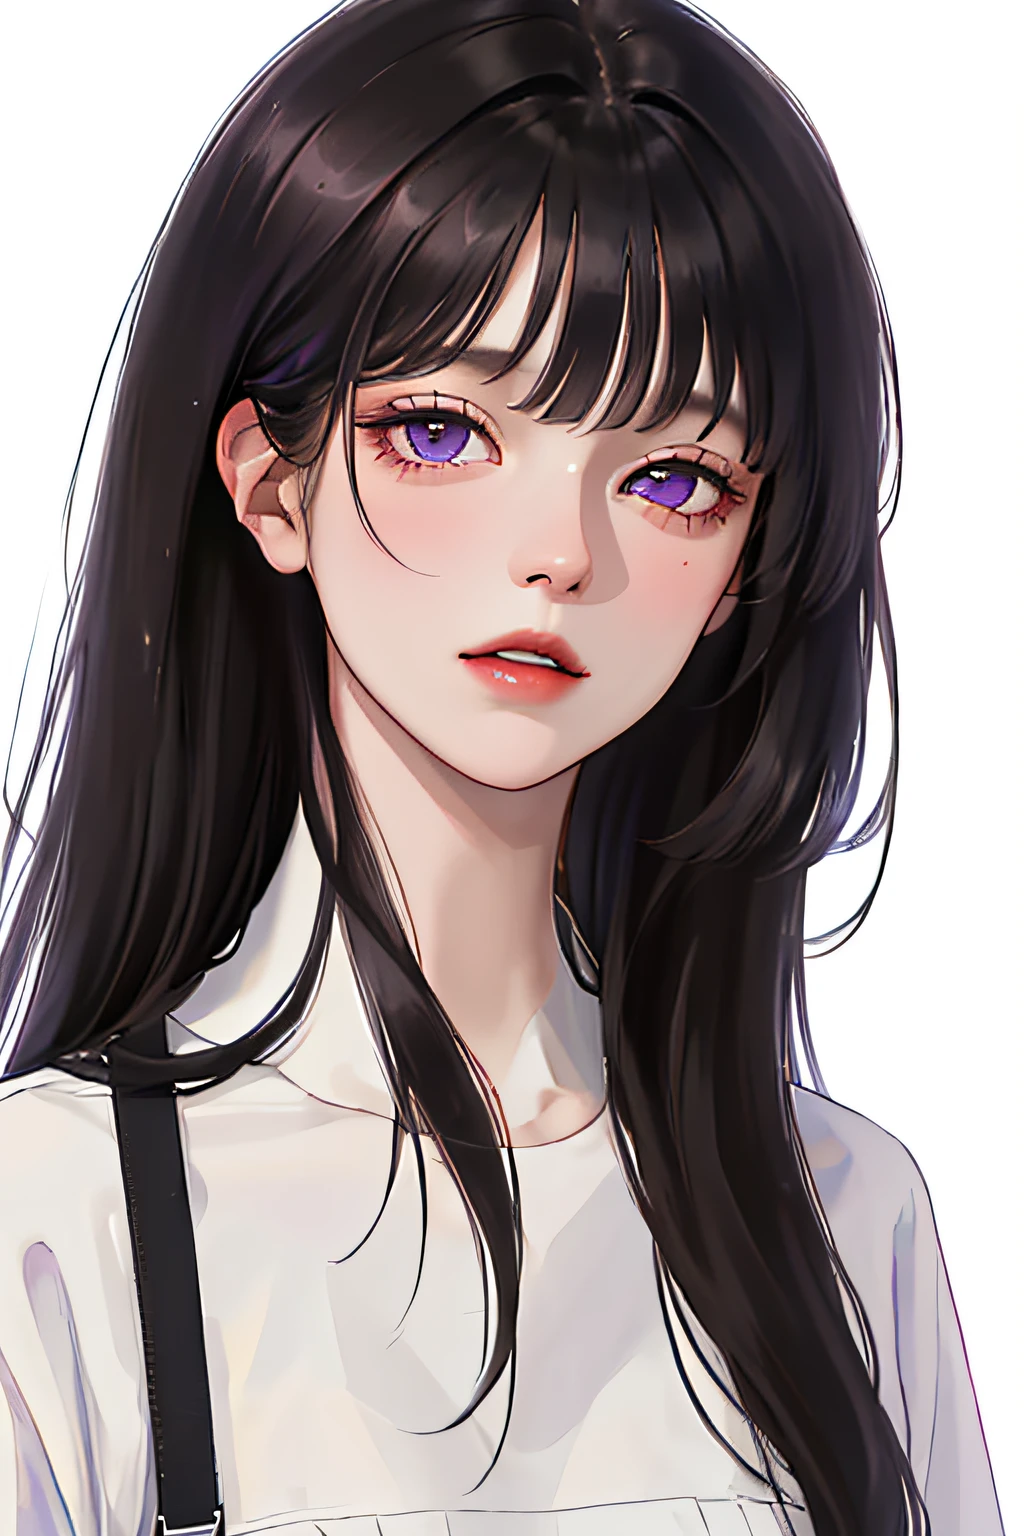 (highest resolution, distinct_image) The best quality, a woman, masterpiece, highly detailed, (semi-realistic), long black hair, long straight hair, black hair bangs, purple eyes, mature, cherry glossy lips, white background, close-up portrait, solid circle eyes, minimalistic